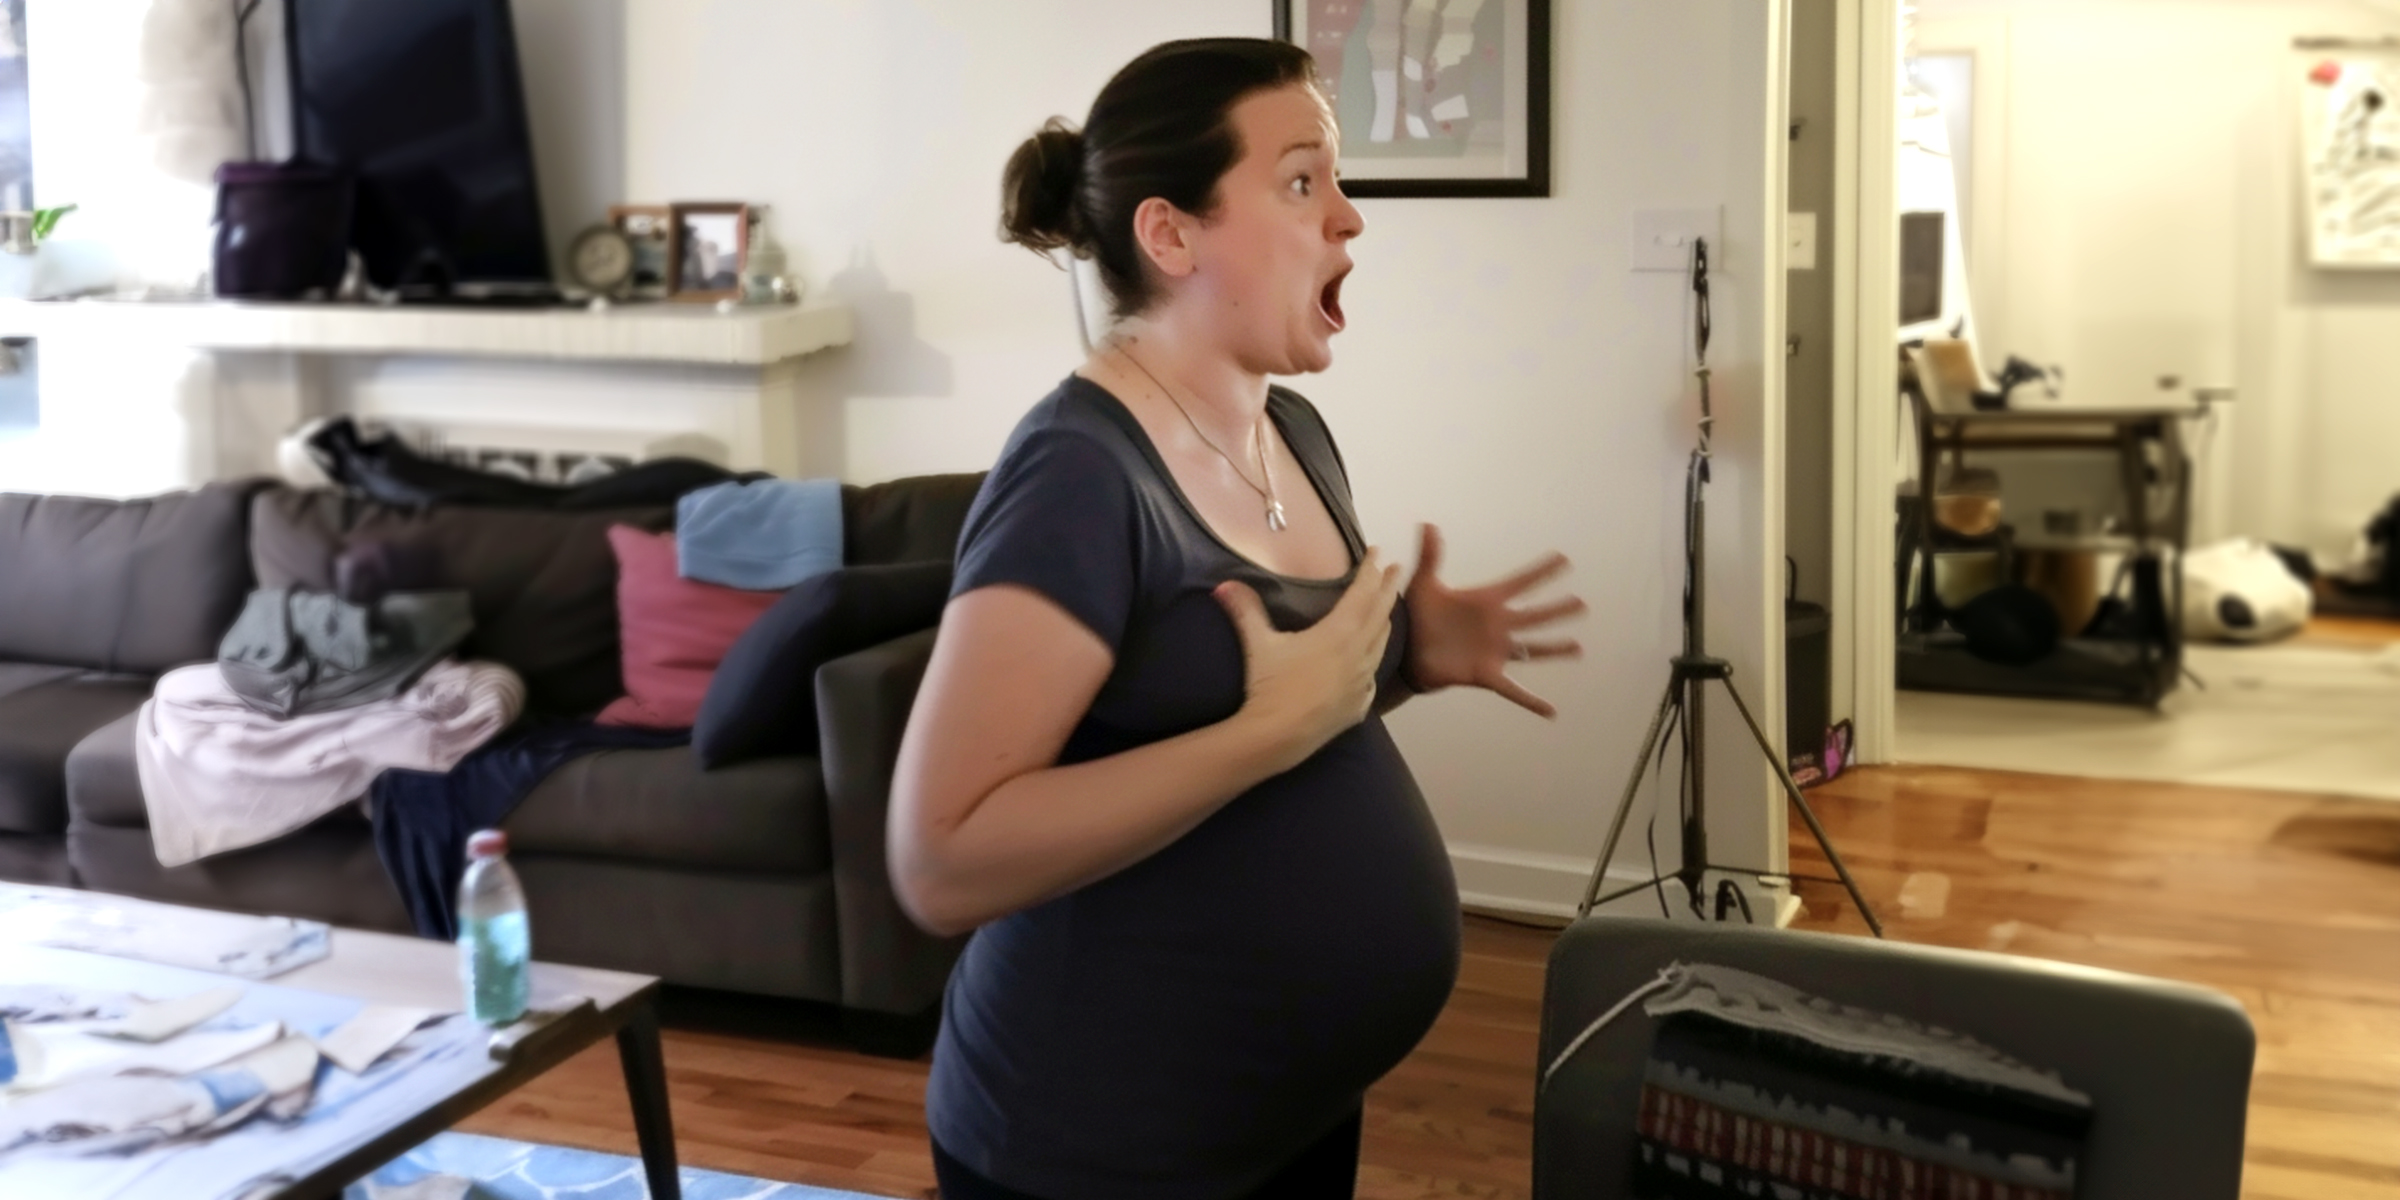 A shocked pregnant woman | Source: Amomama